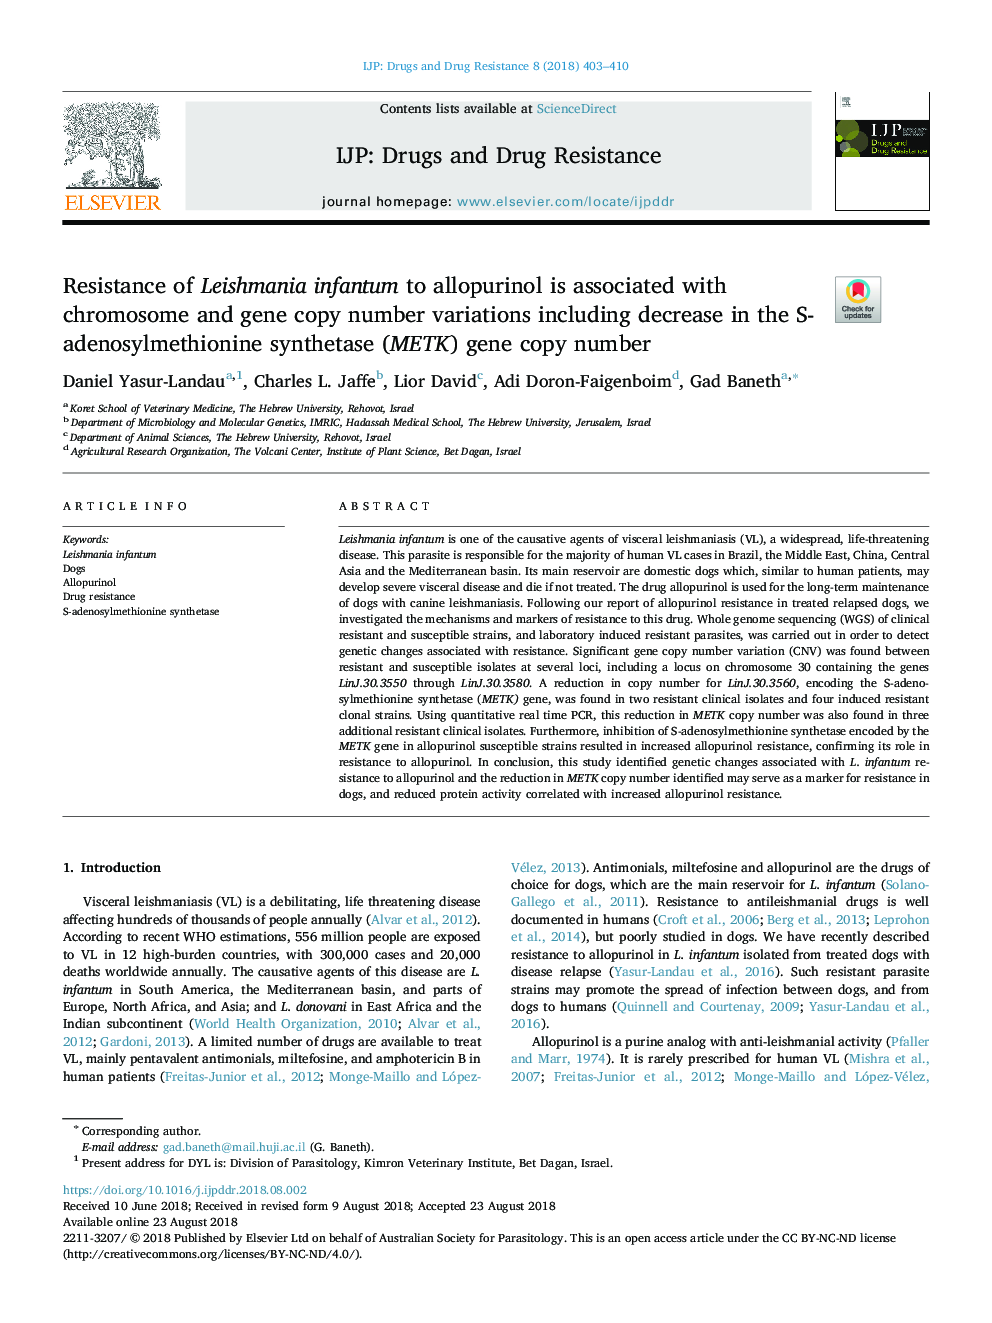 Resistance of Leishmania infantum to allopurinol is associated with chromosome and gene copy number variations including decrease in the S-adenosylmethionine synthetase (METK) gene copy number